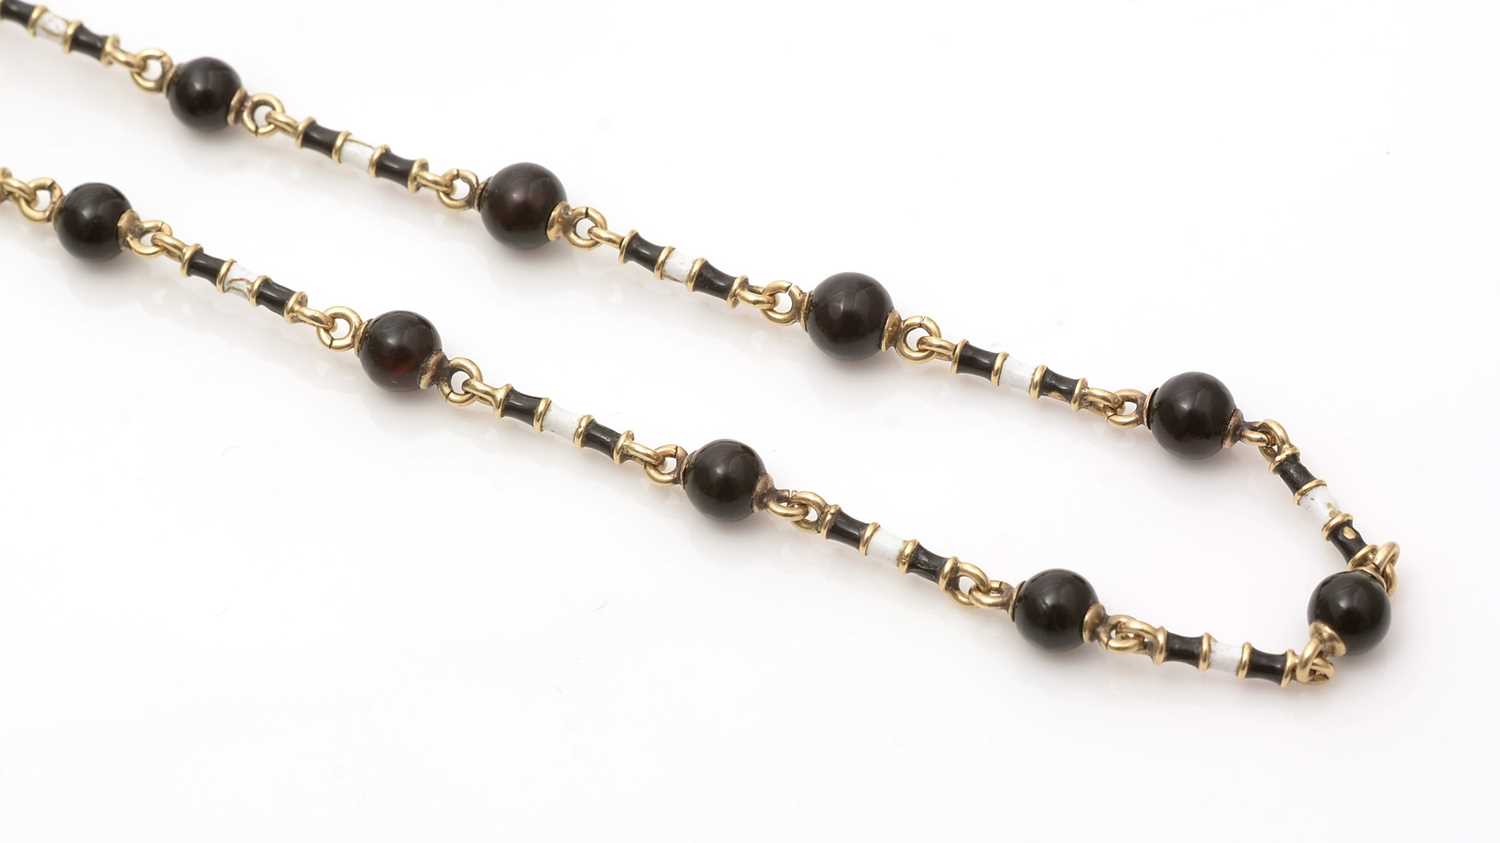 Lot 662 - An onyx, enamel and gold muff chain necklace